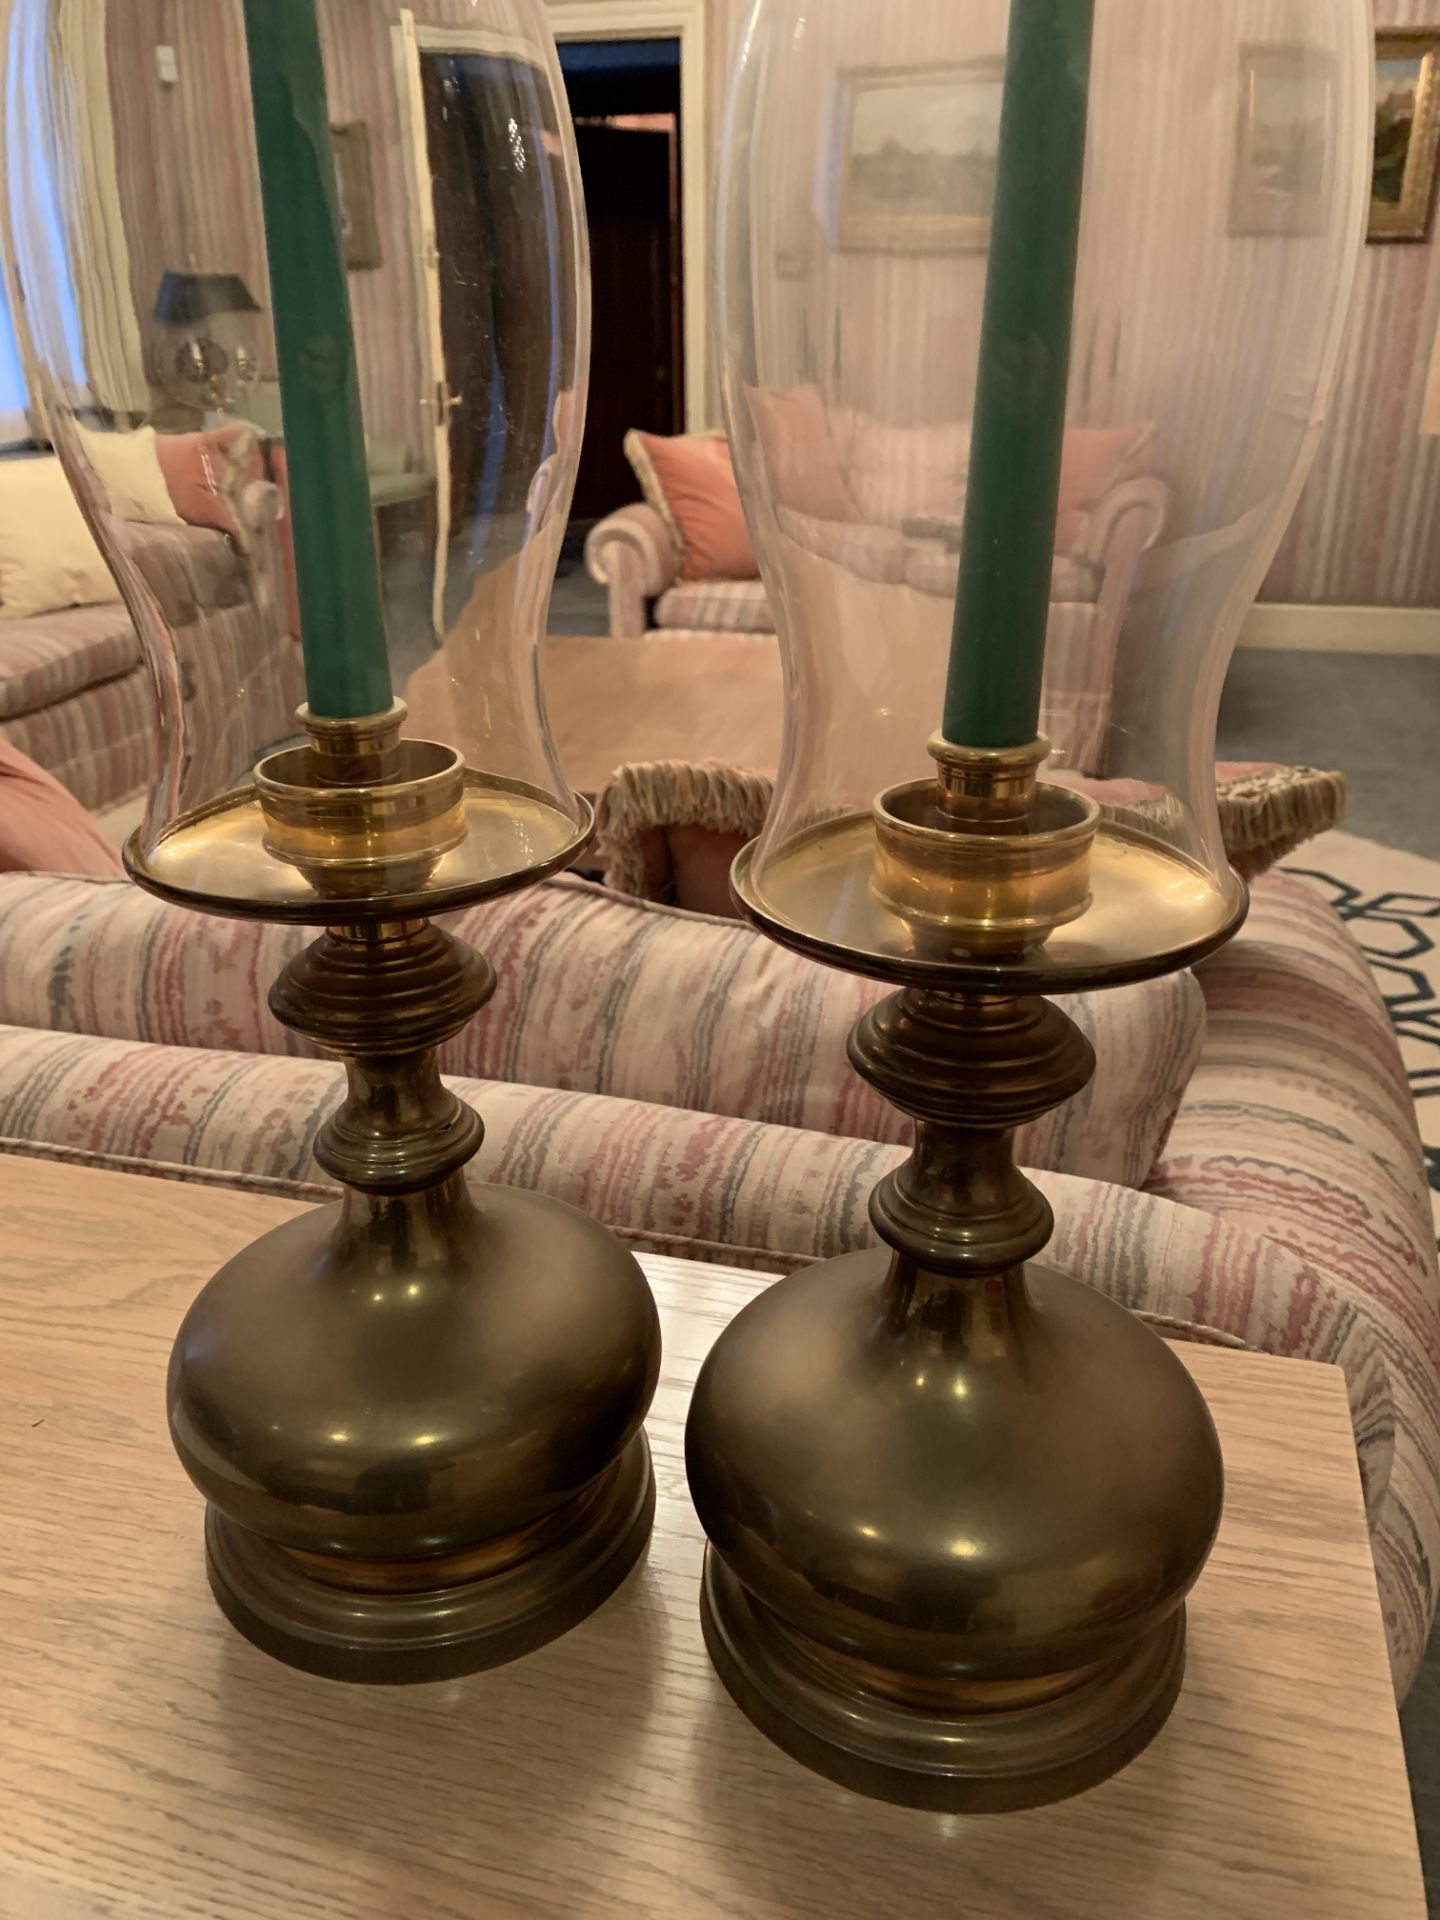 Pair of brass candlesticks with glass storm shades - Image 2 of 3